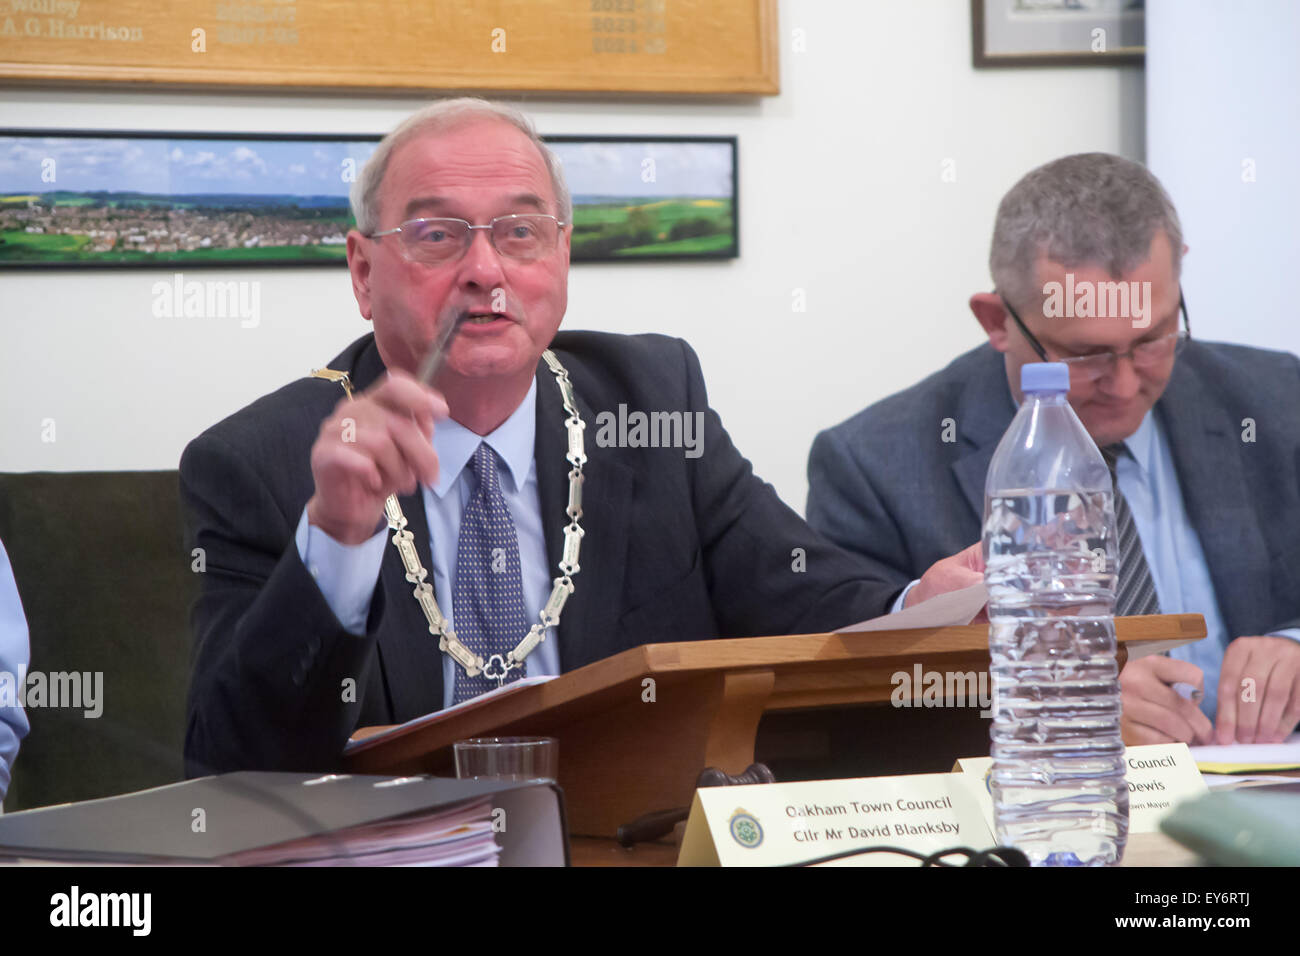 Oakham, UK. 22nd July, 2015. Chairman of Oakham Town Council and Mayor of Oakham, Councillor Alf Dewis faced allegations of bullying, improper accounting, fraud, and bringing the council into disrepute, at an extraordinary meeting of the full council when he faced a vote of no confidence proposed by Councillor Martin Brookes. There were no seconders for the proposal and so Cllr Dewis won the day and is still the Chairman of Oakham Town Council. Credit:  Jim Harrison/Alamy Live News Stock Photo